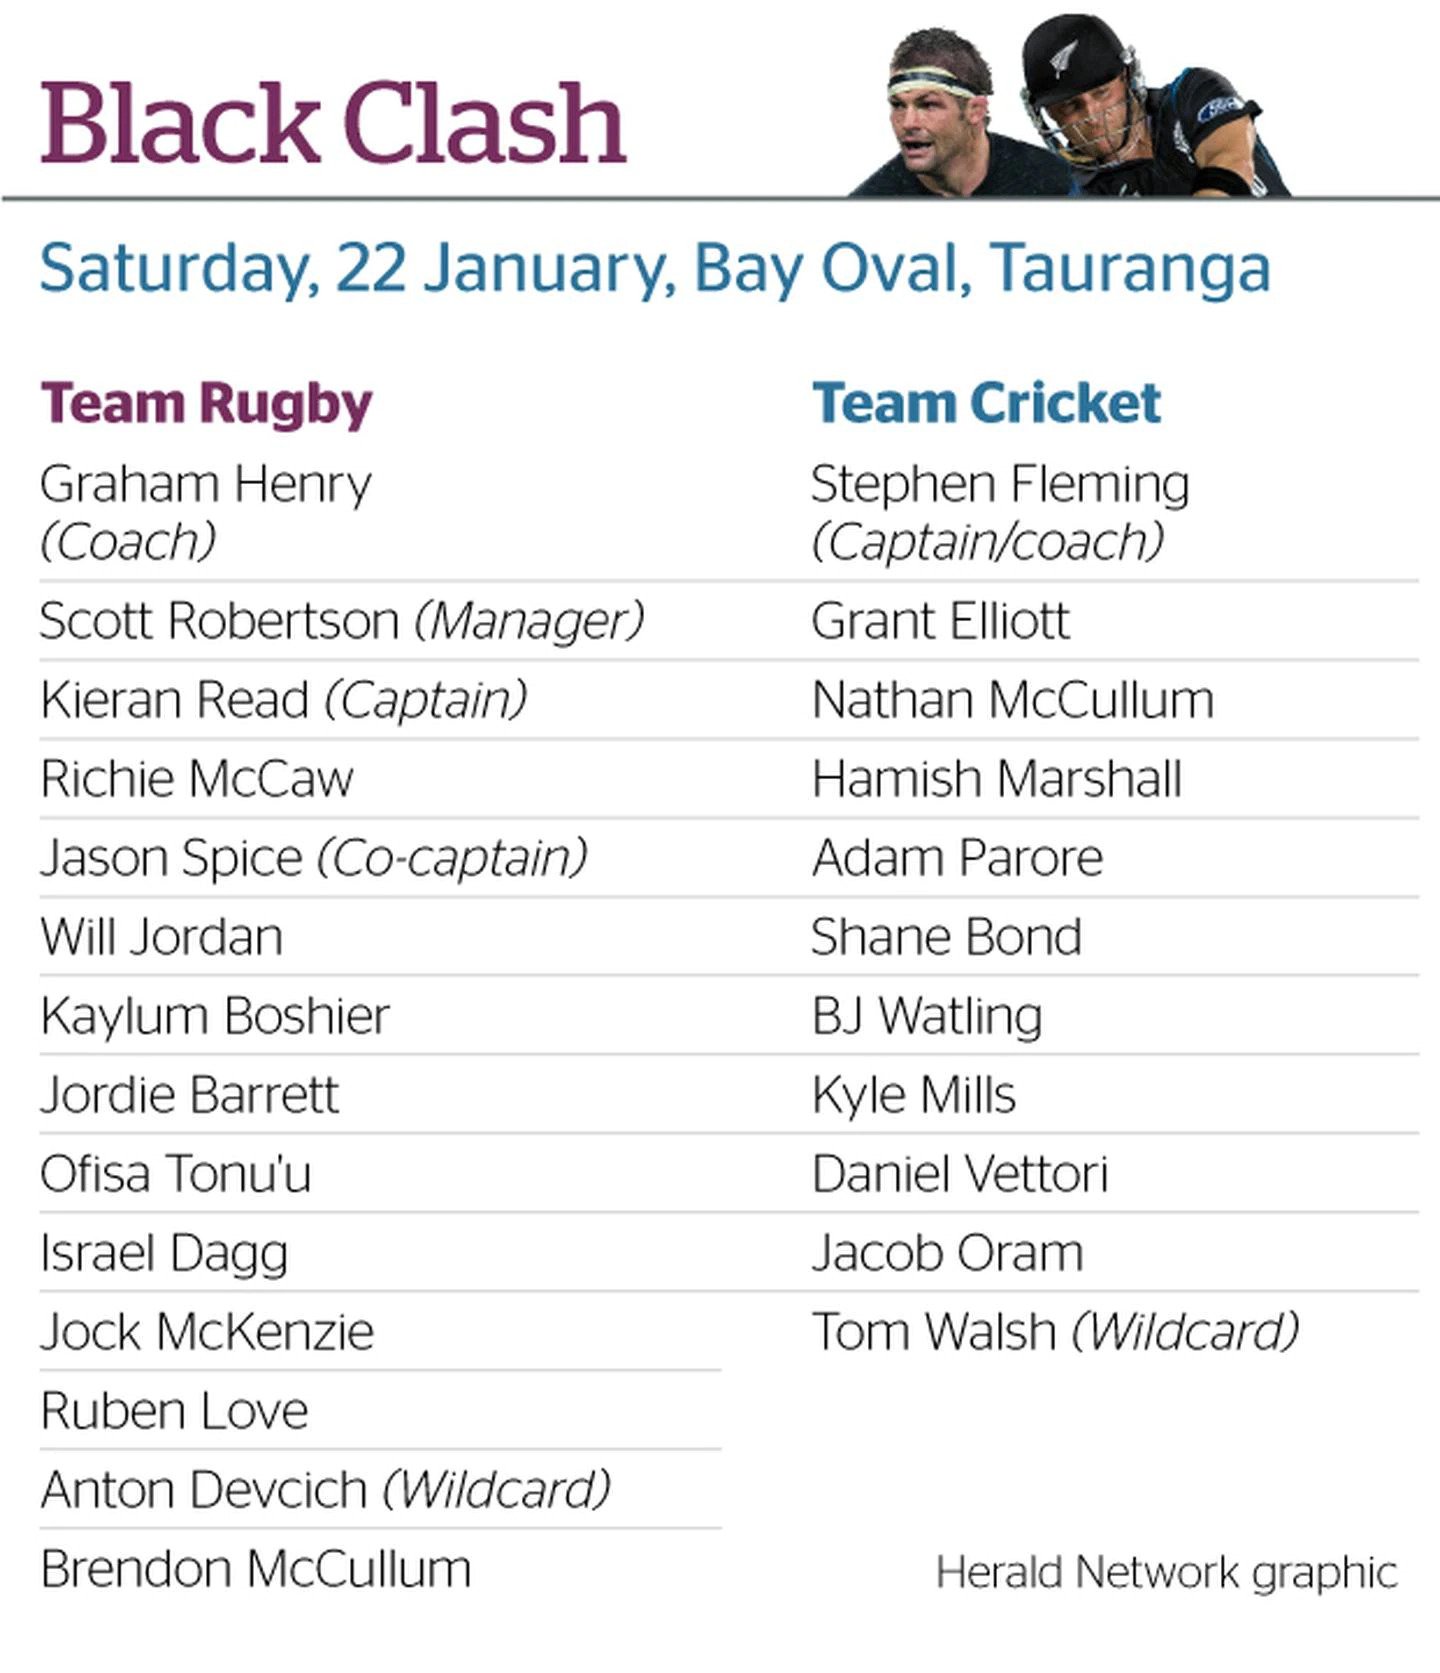 Revealed Full lineup of all players for T20 Black Clash